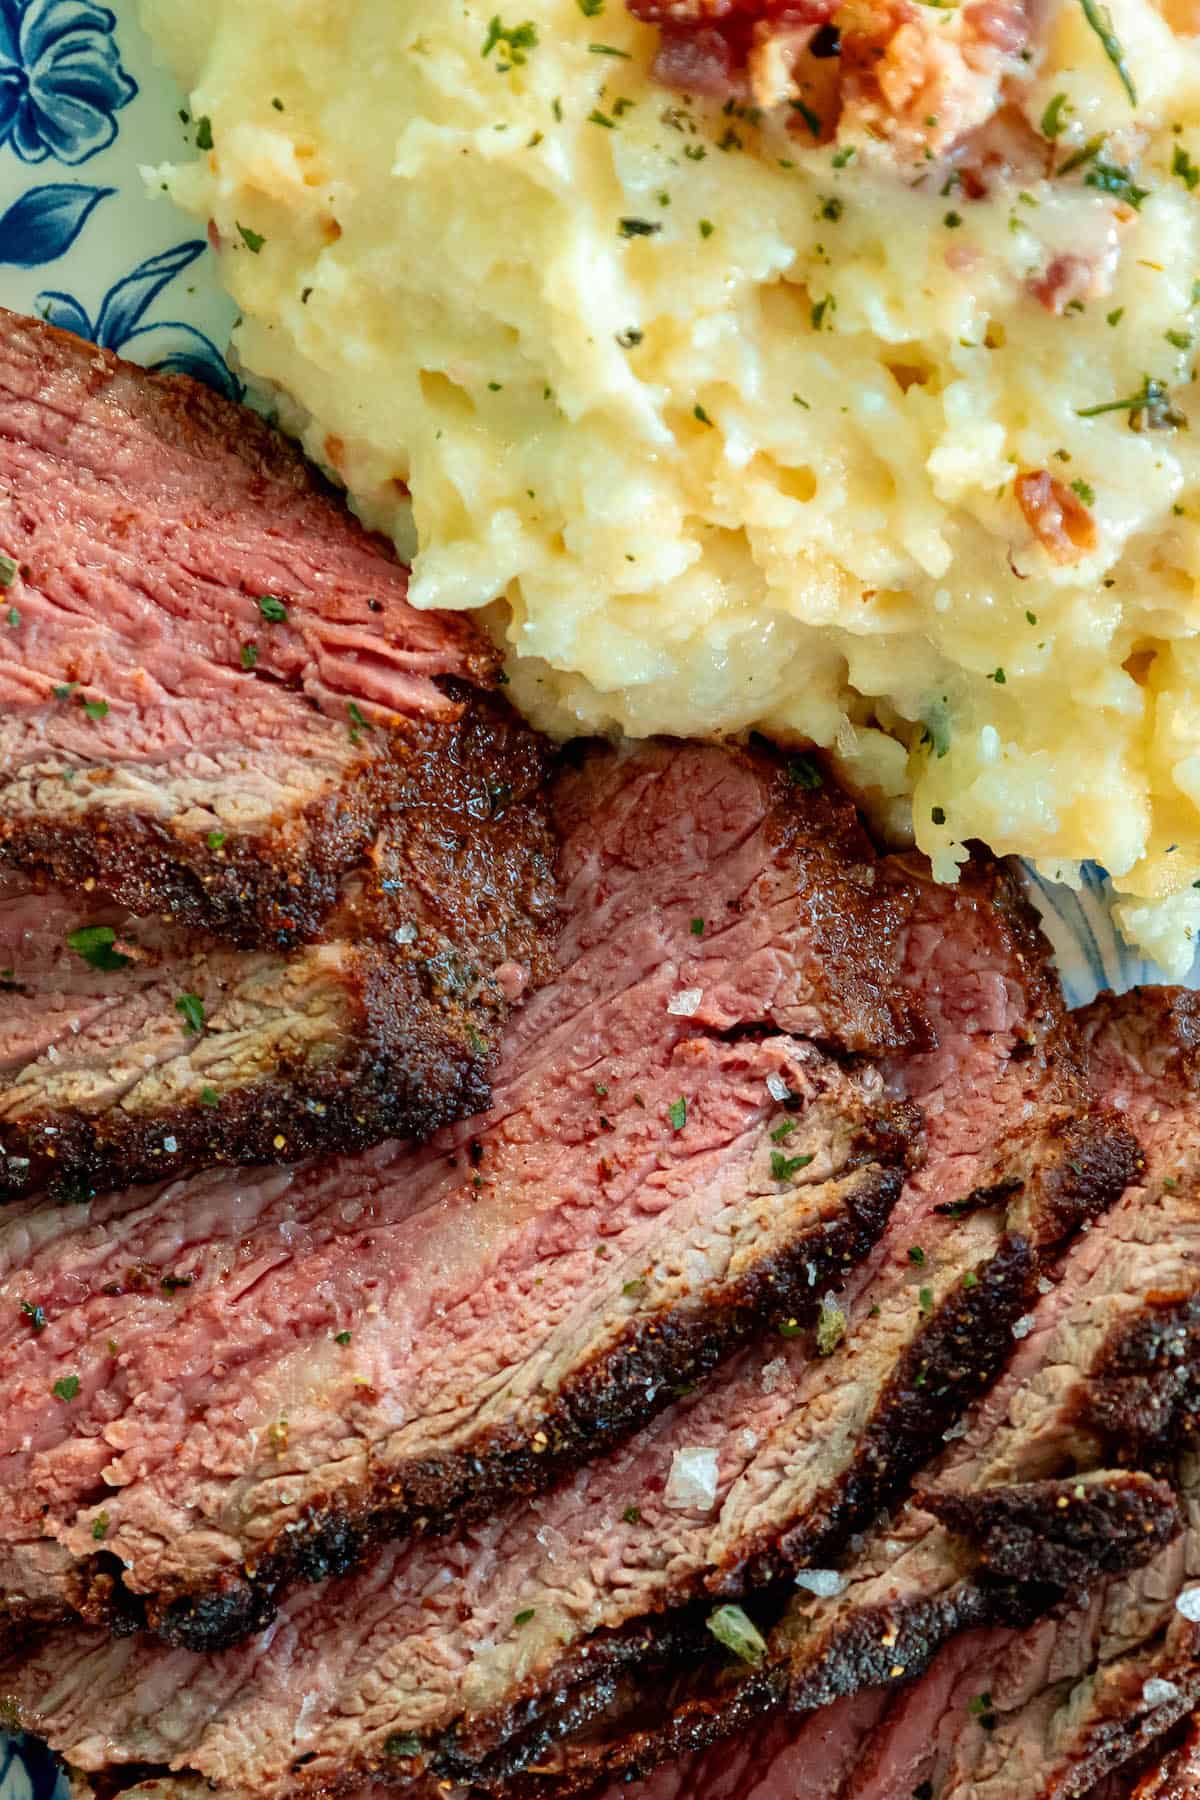 Tri tip steak served with mashed potatoes on a plate.